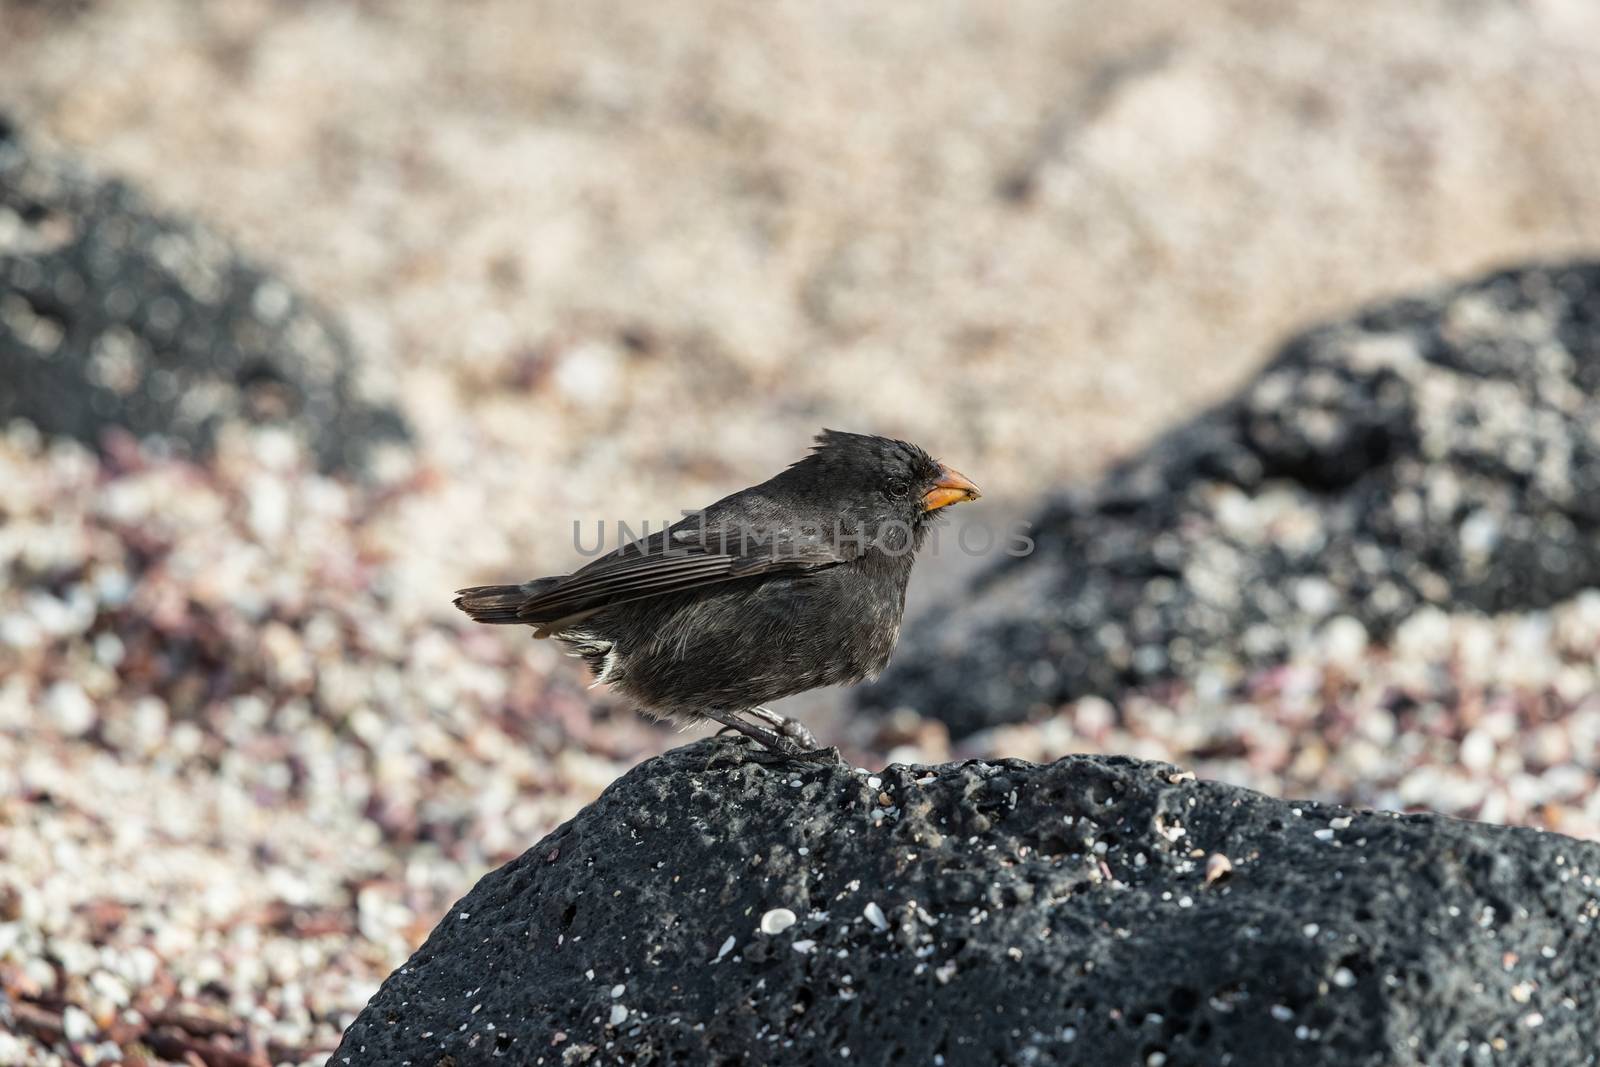 Galapagos Darwin Finches. Small Ground Finch seen on Galapagos Islands. Darwin Finches are the central animals Charles Darwins book On the Origin of Species describing evolution by natural selection by Maridav